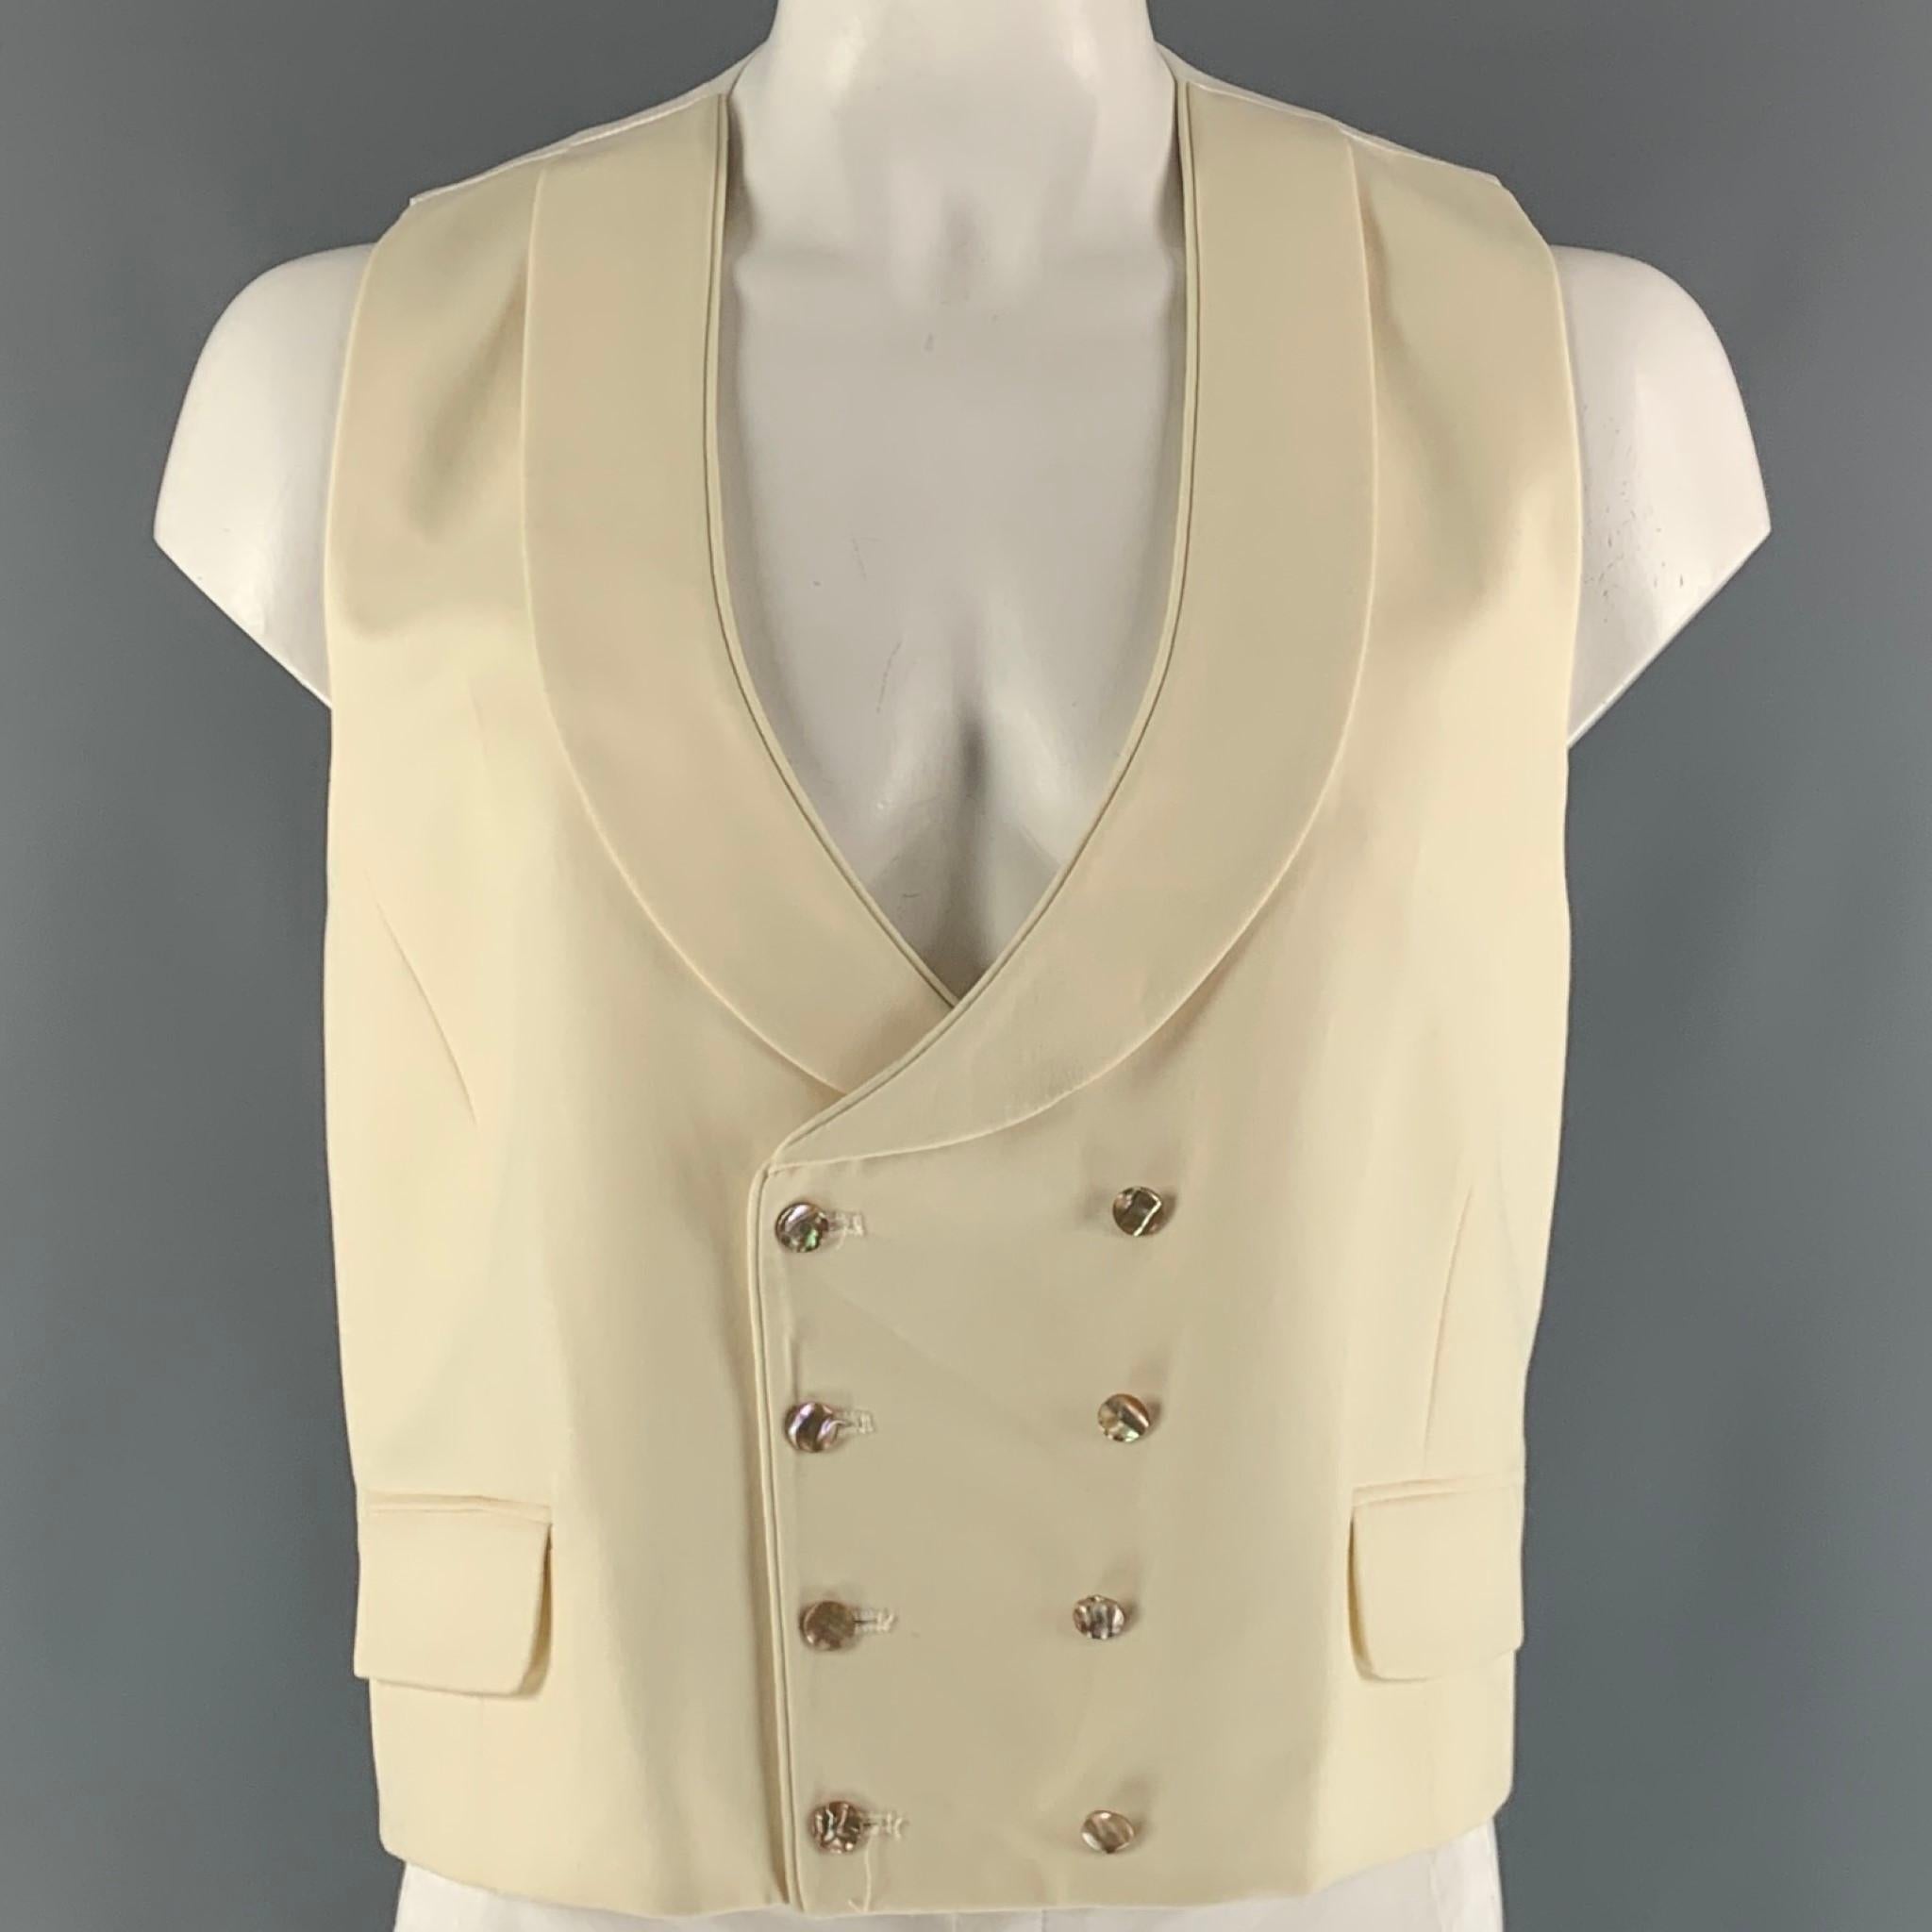 FAVOURBROOK u-neck vest comes in a beige and white wool woven material featuring a shawl collar, flap pockets, double brest, back belts, and a mother of pearls buttoned closure. Made in England.

Excellent Pre-Owned Condition.
Marked: no size